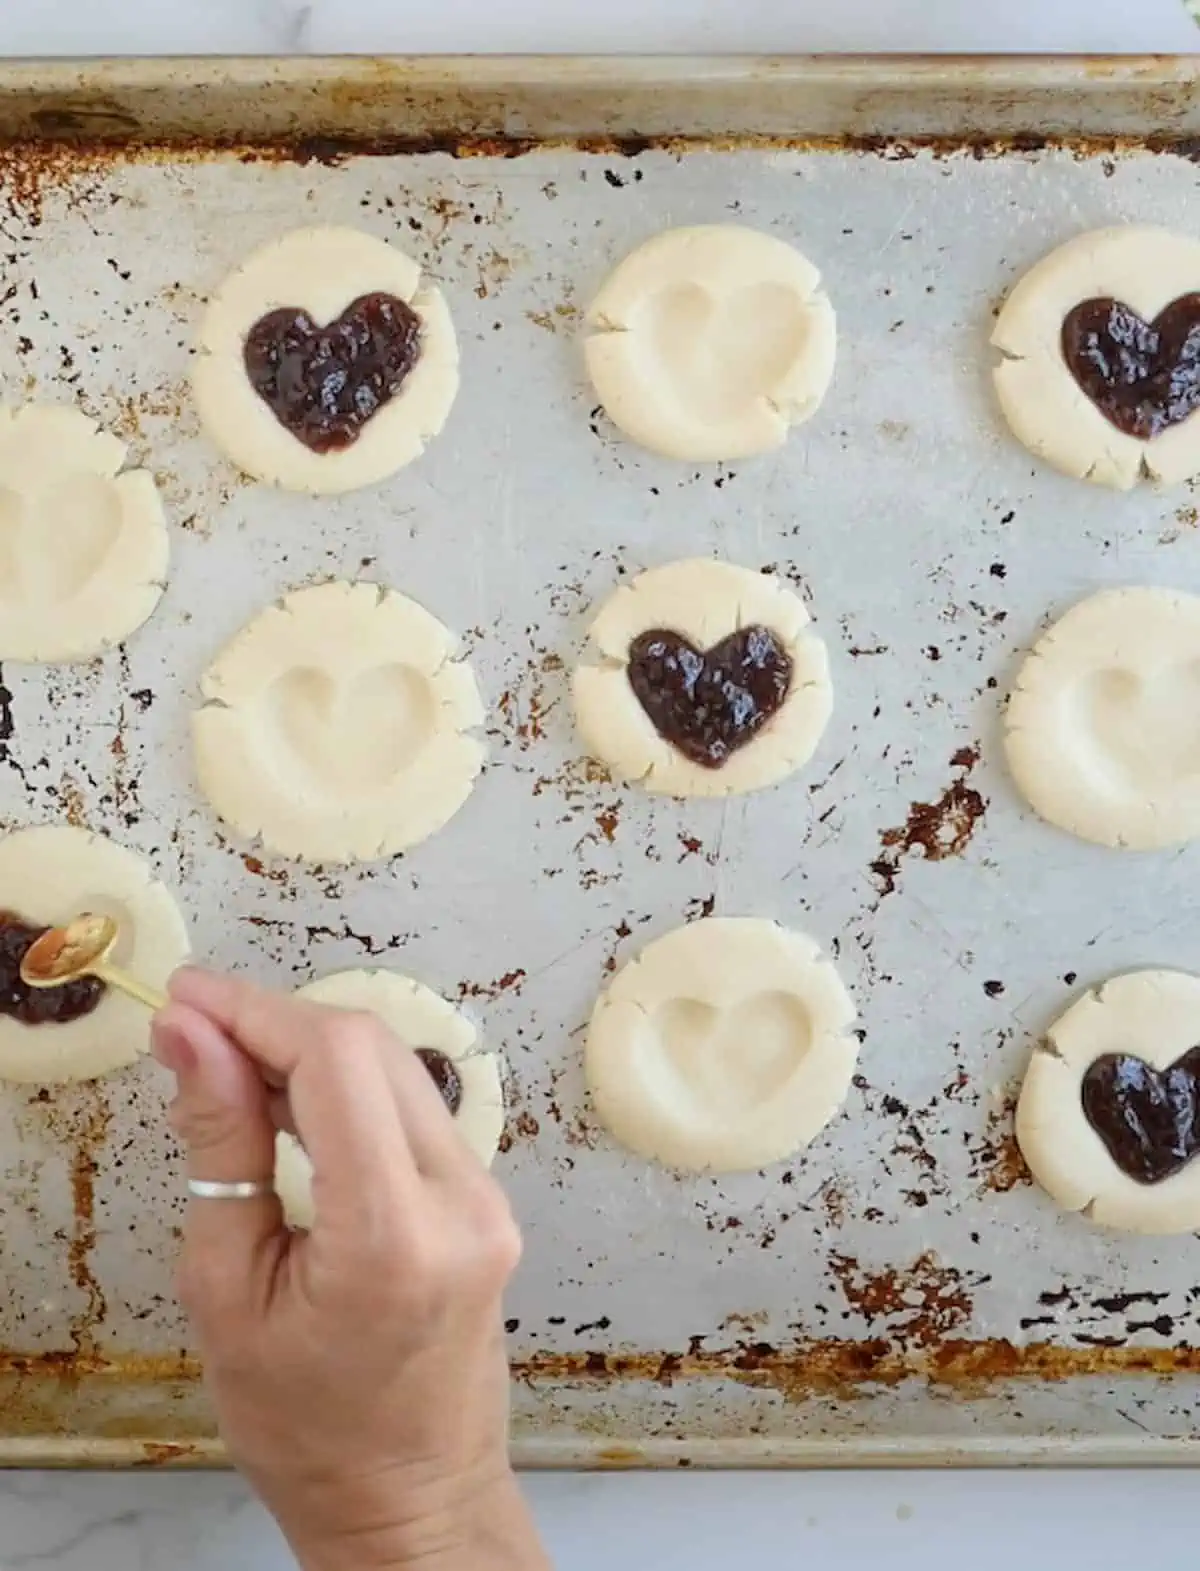 Hand spooning jam into the heart shaped dents of the prepared cookies.